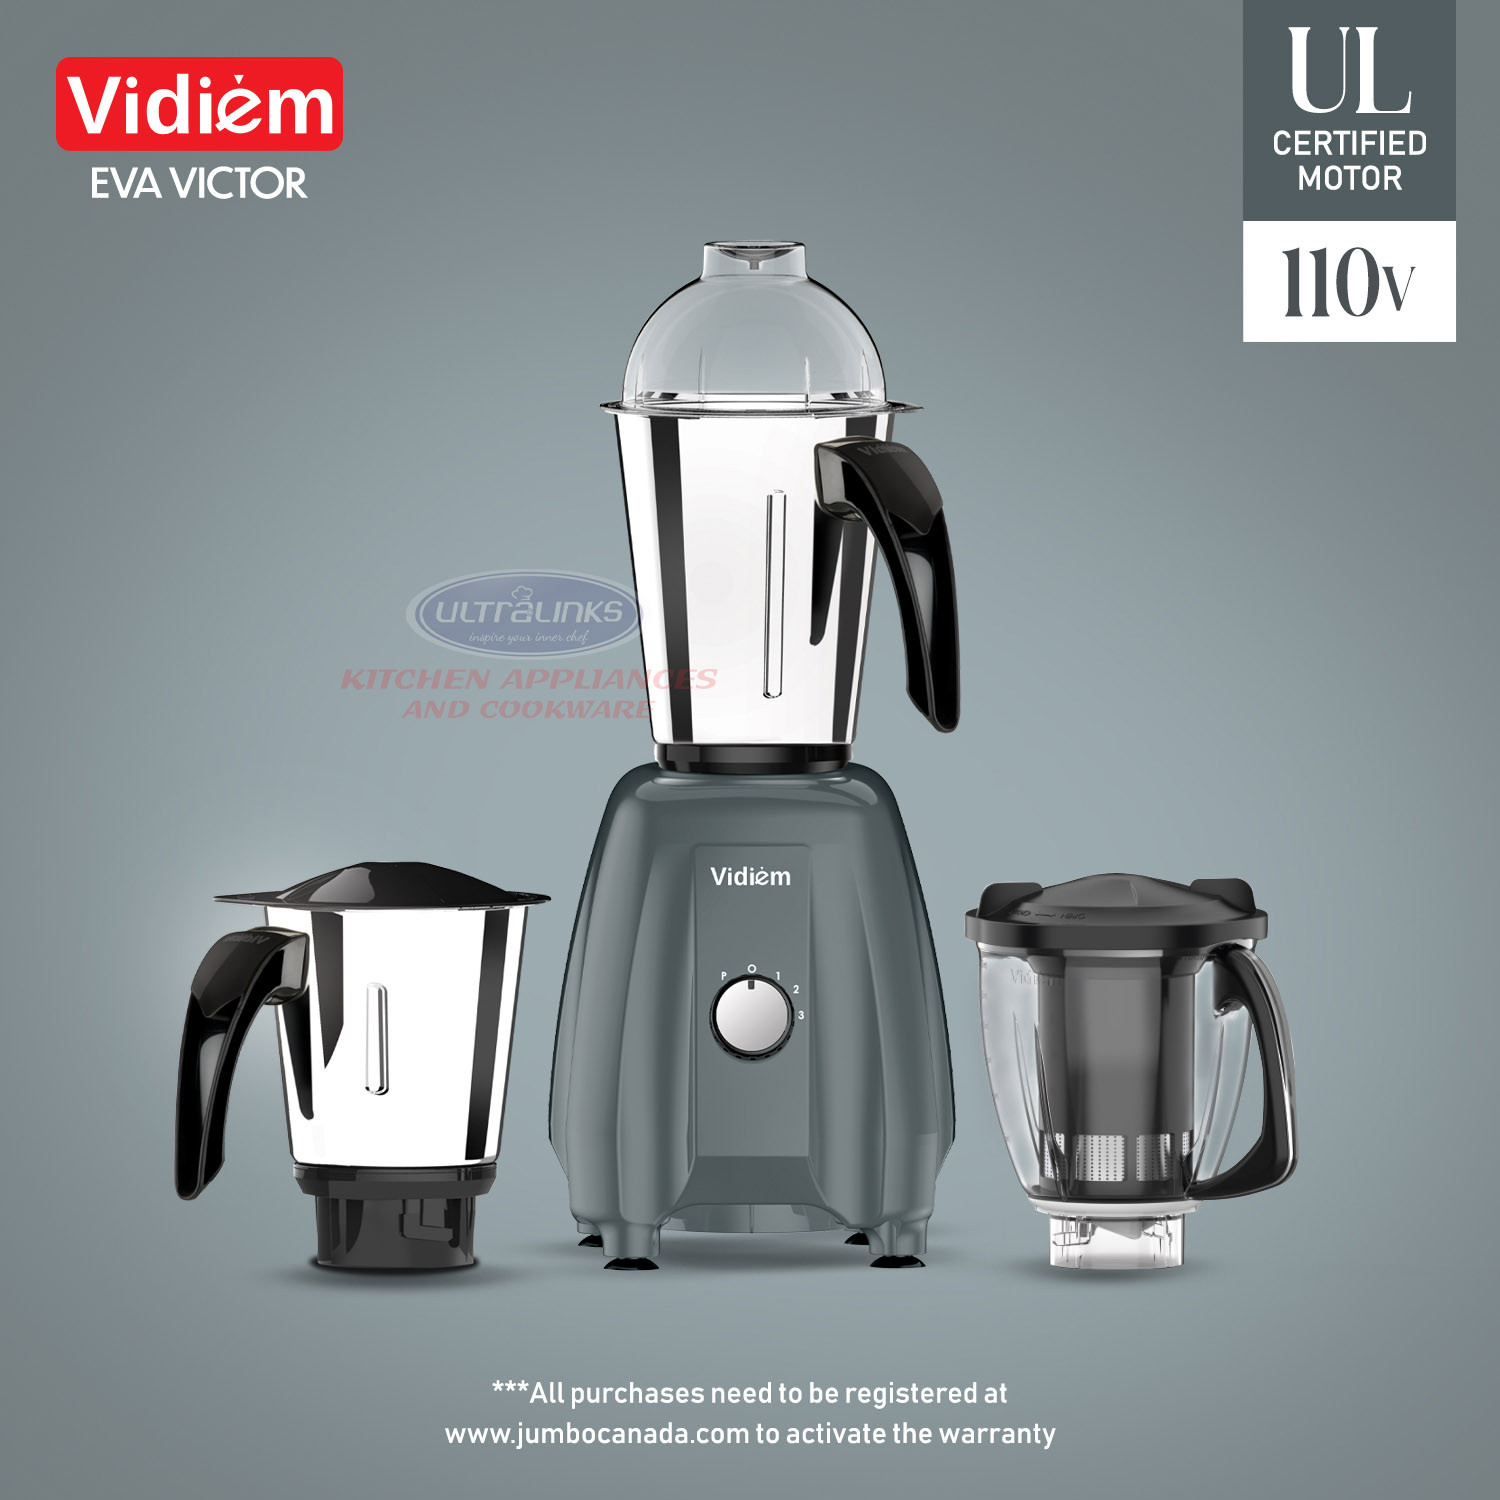 vidiem-eva-victor-650w-110v-stainless-steel-jars-indian-mixer-grinder-spice-coffee-grinder-for-use-in-canada-usa